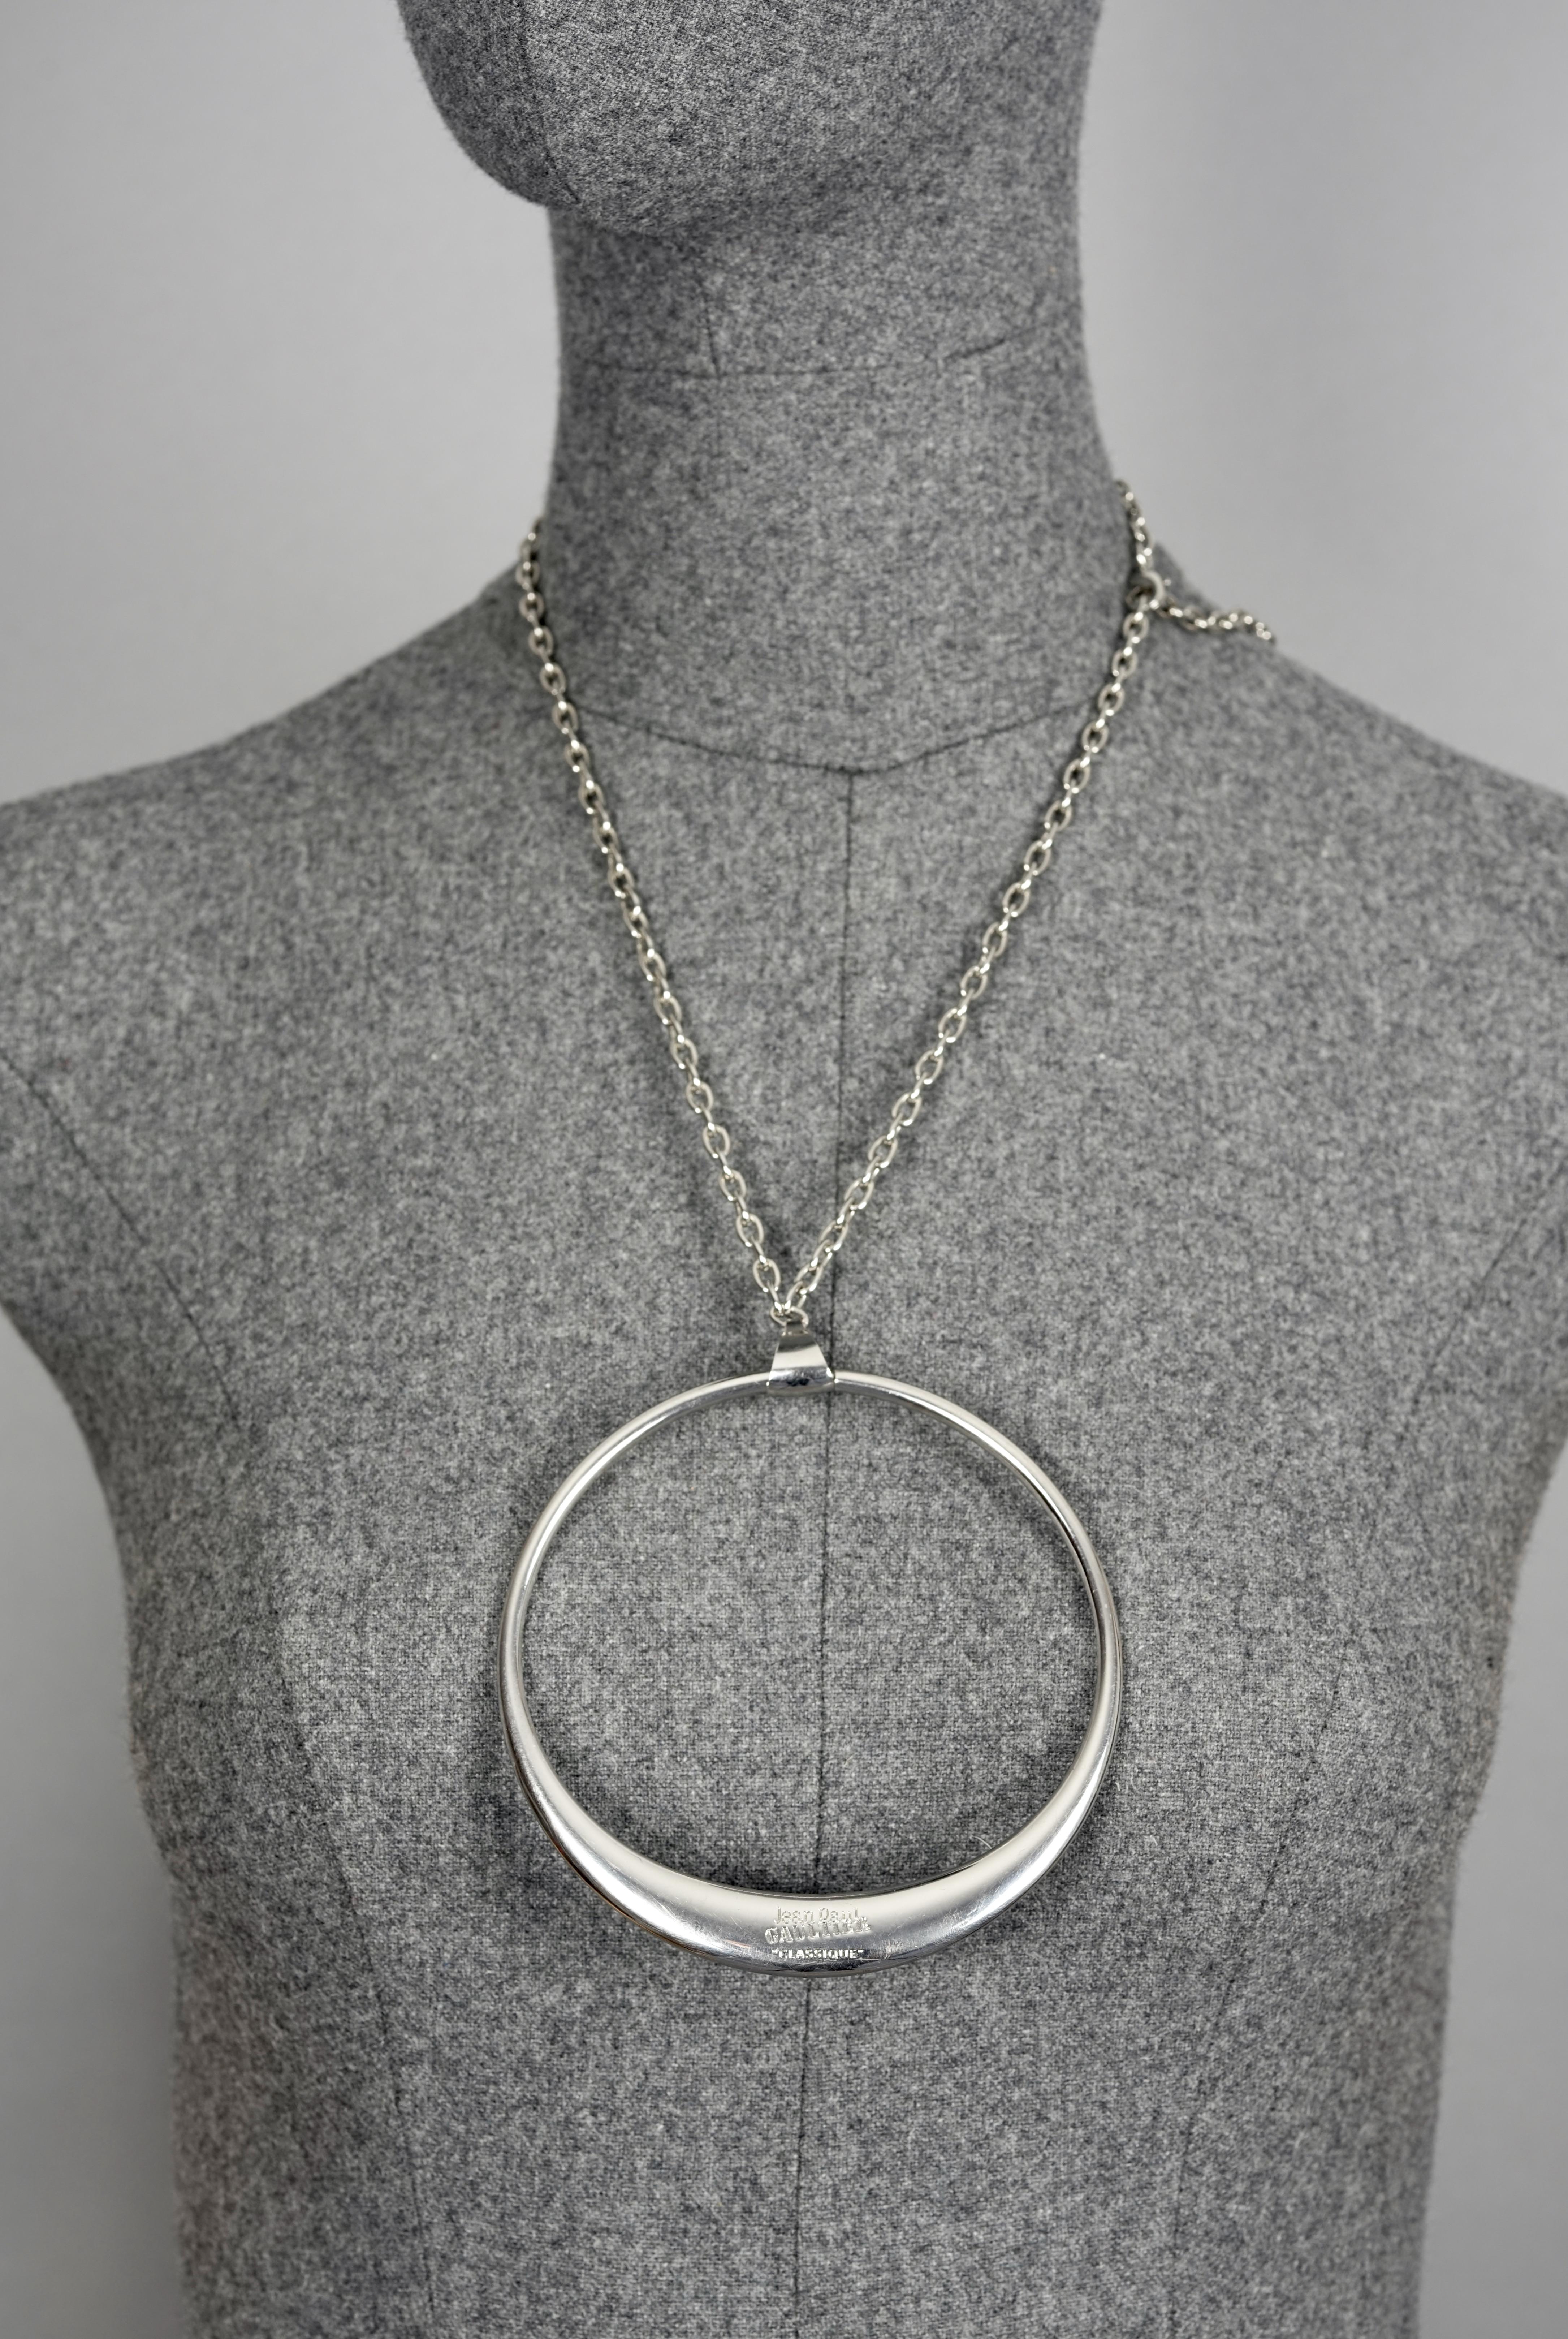 Vintage Massive JEAN PAUL GAULTIER Modernist Ring Pendant Silver Chain Necklace

Measurements:
Height: 4.40 inches (11.2 cm)
Width: 4.13 inches (10.5 cm)
Maximum Length: 15.15 inches (67 cm)

Features:
- 100% Authentic JEAN PAUL GAULTIER.
-